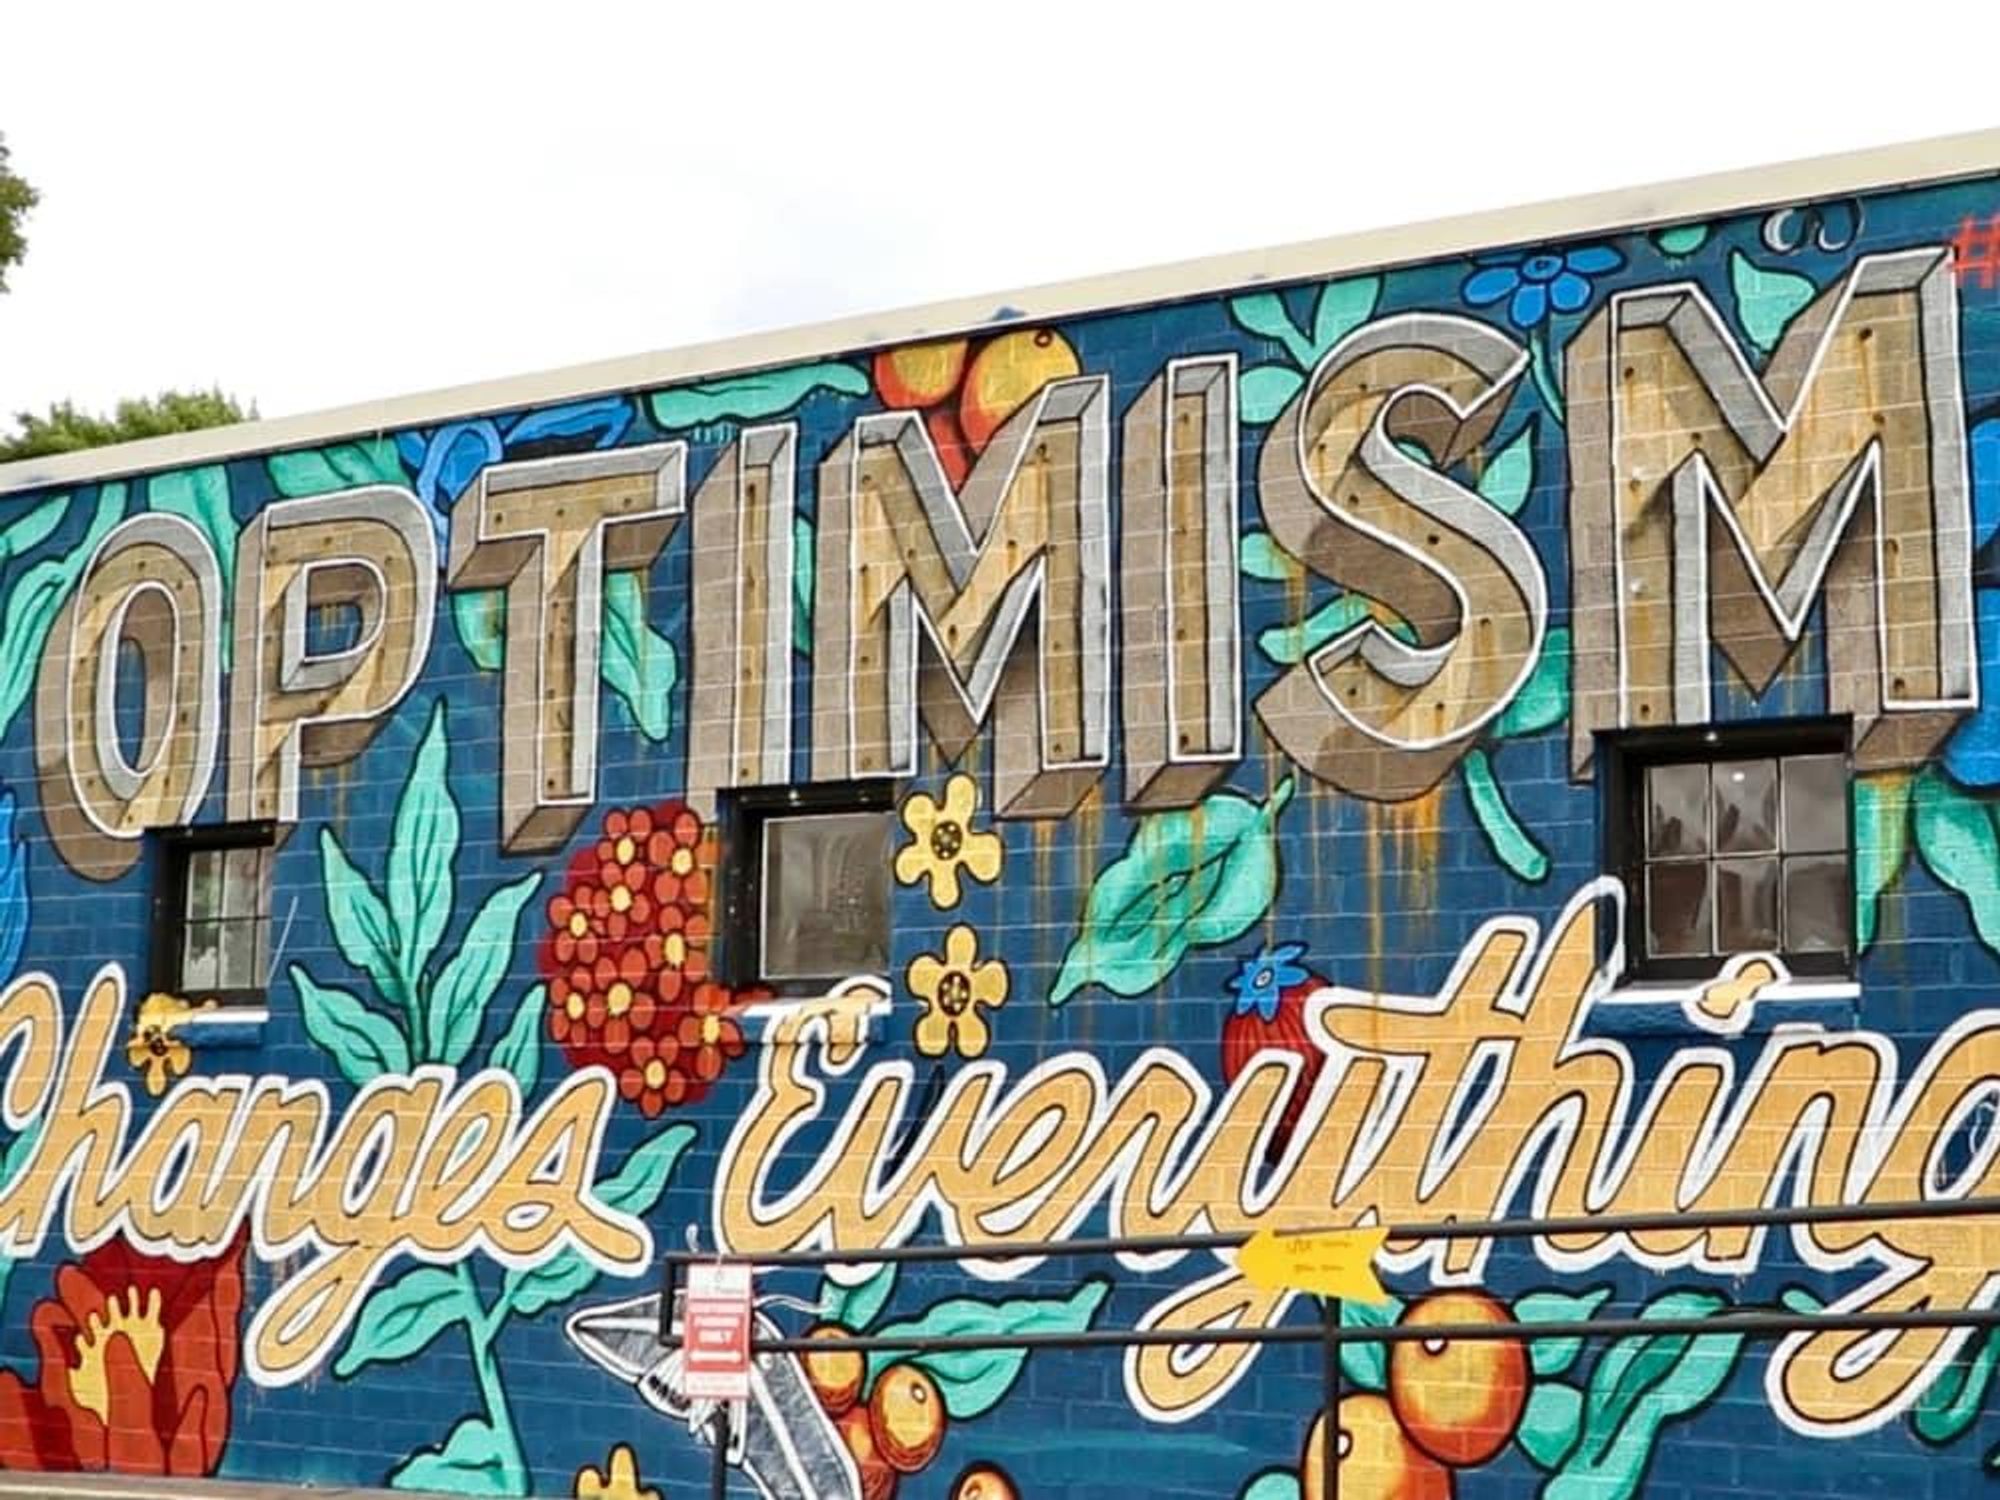 Frost Bank Opt for Optimism mural Austin